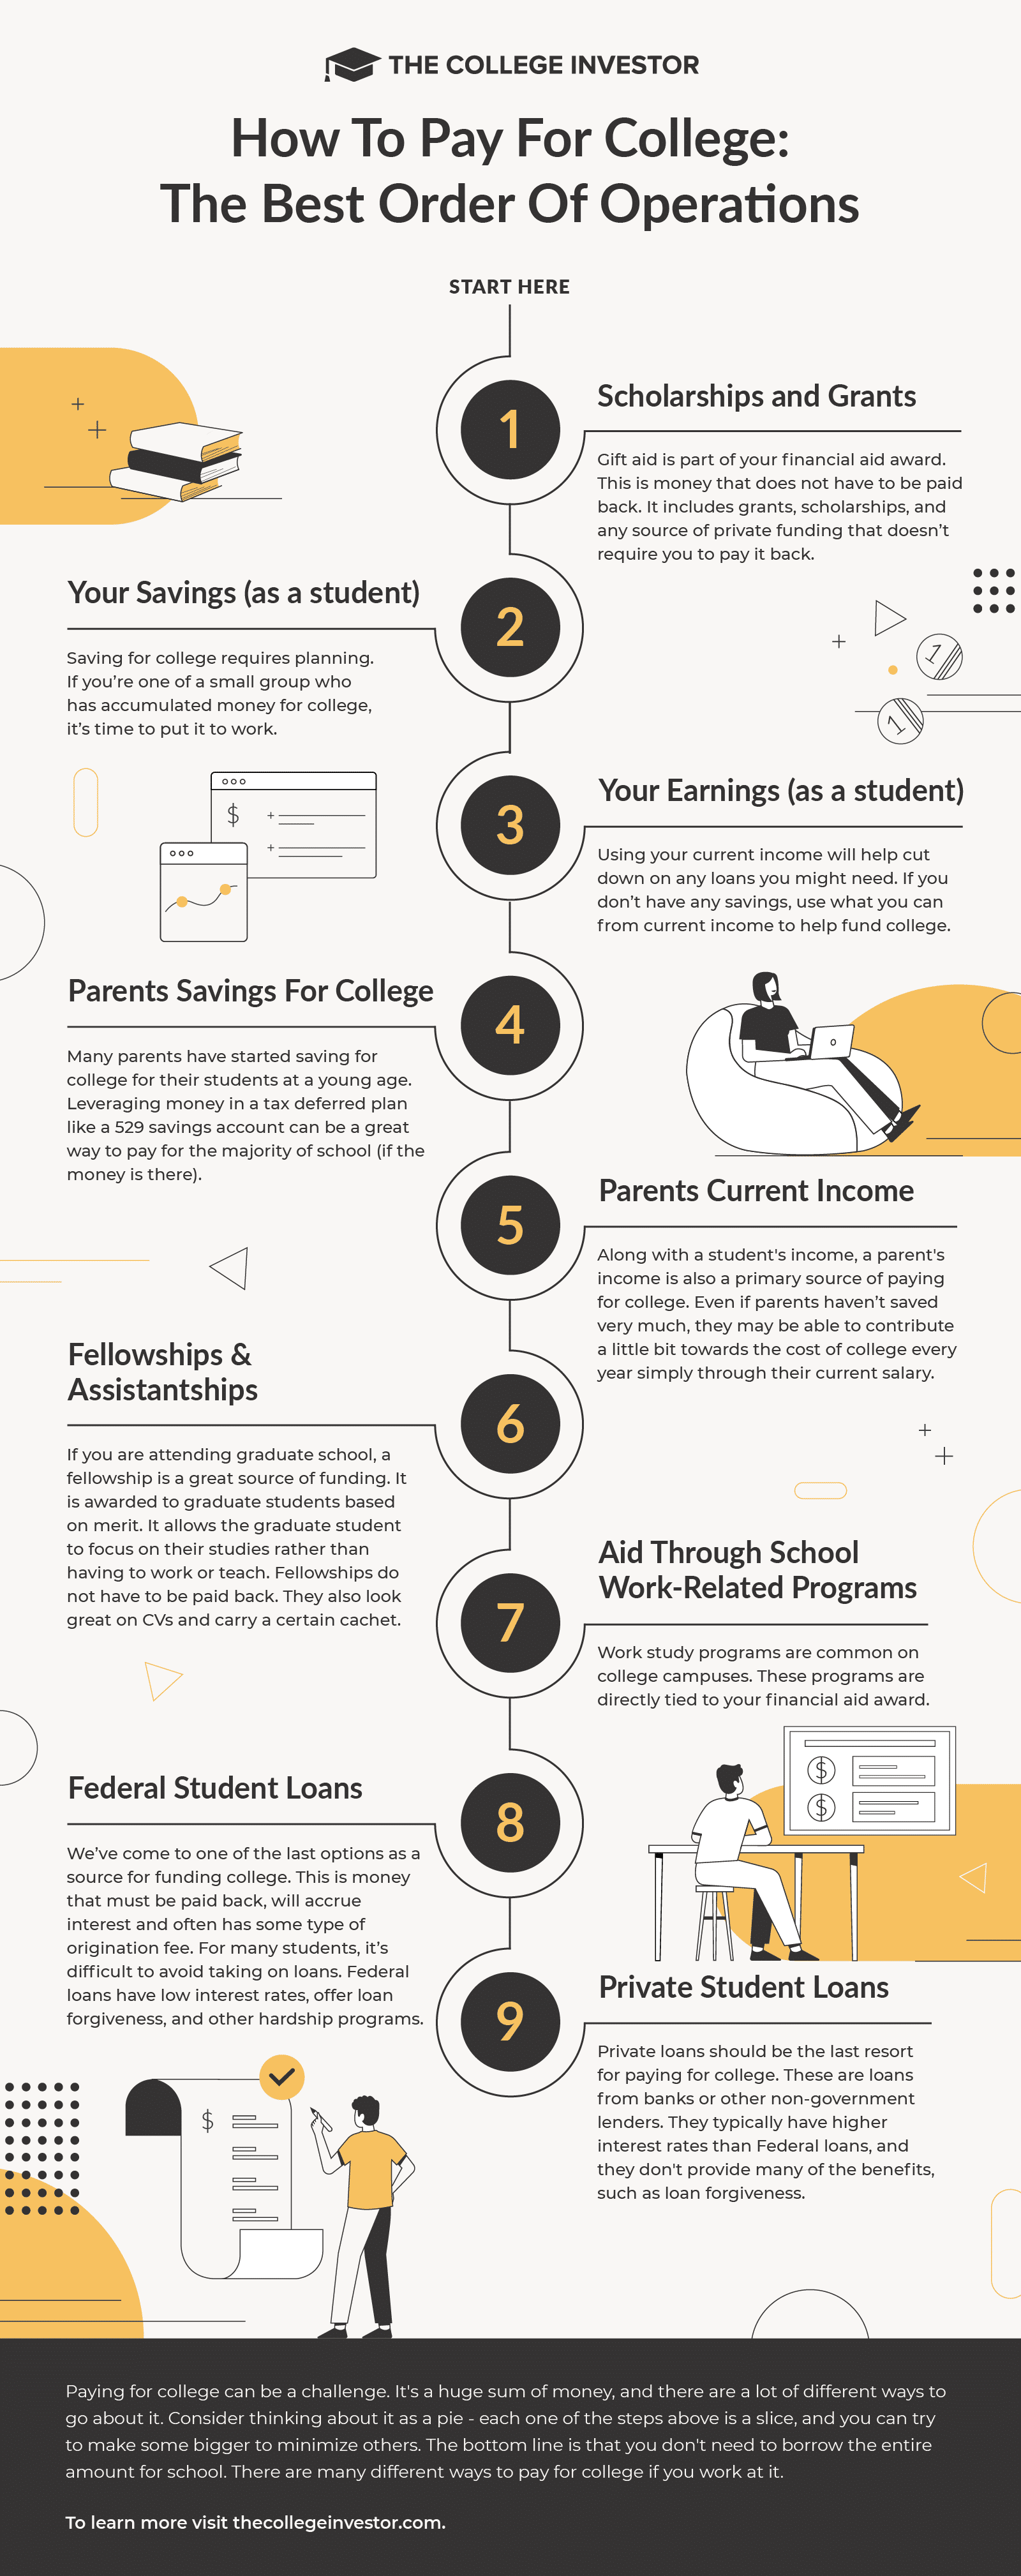 How To Pay For College: Order Of Operations Infographic